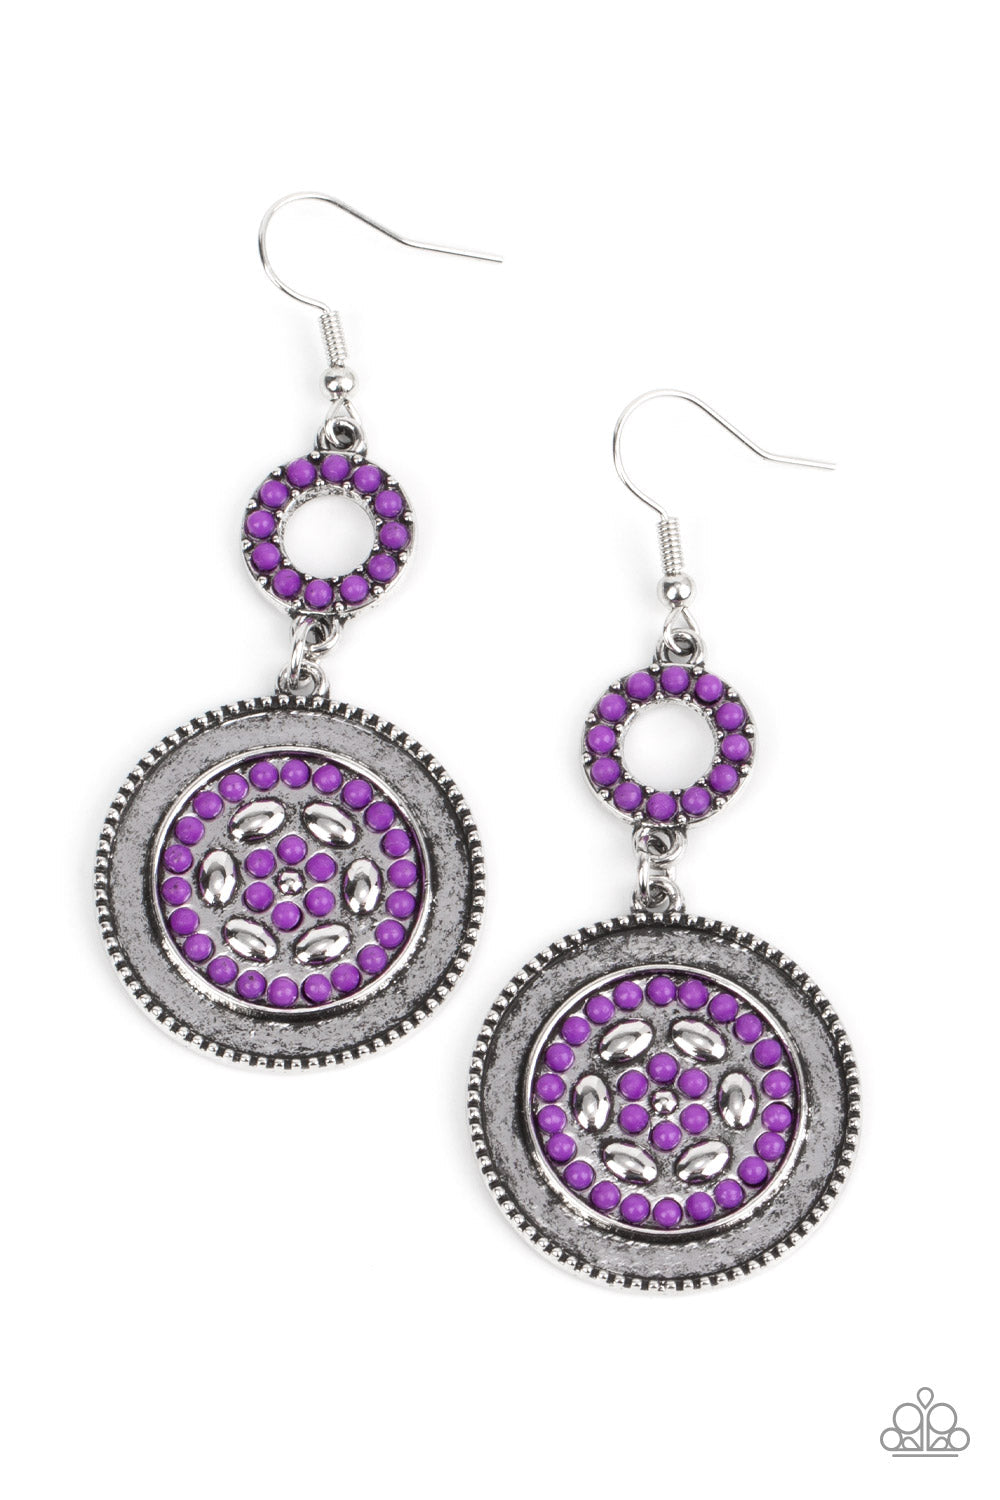 Meadow Mantra - Purple and Silver Earrings - Paparazzi Accessories - Bejeweled Accessories By Kristie -Dotted in dainty purple seed beads, a dainty silver hoop links to an ornate silver disc for a colorful floral finish. Earring attaches to a standard fishhook fitting.